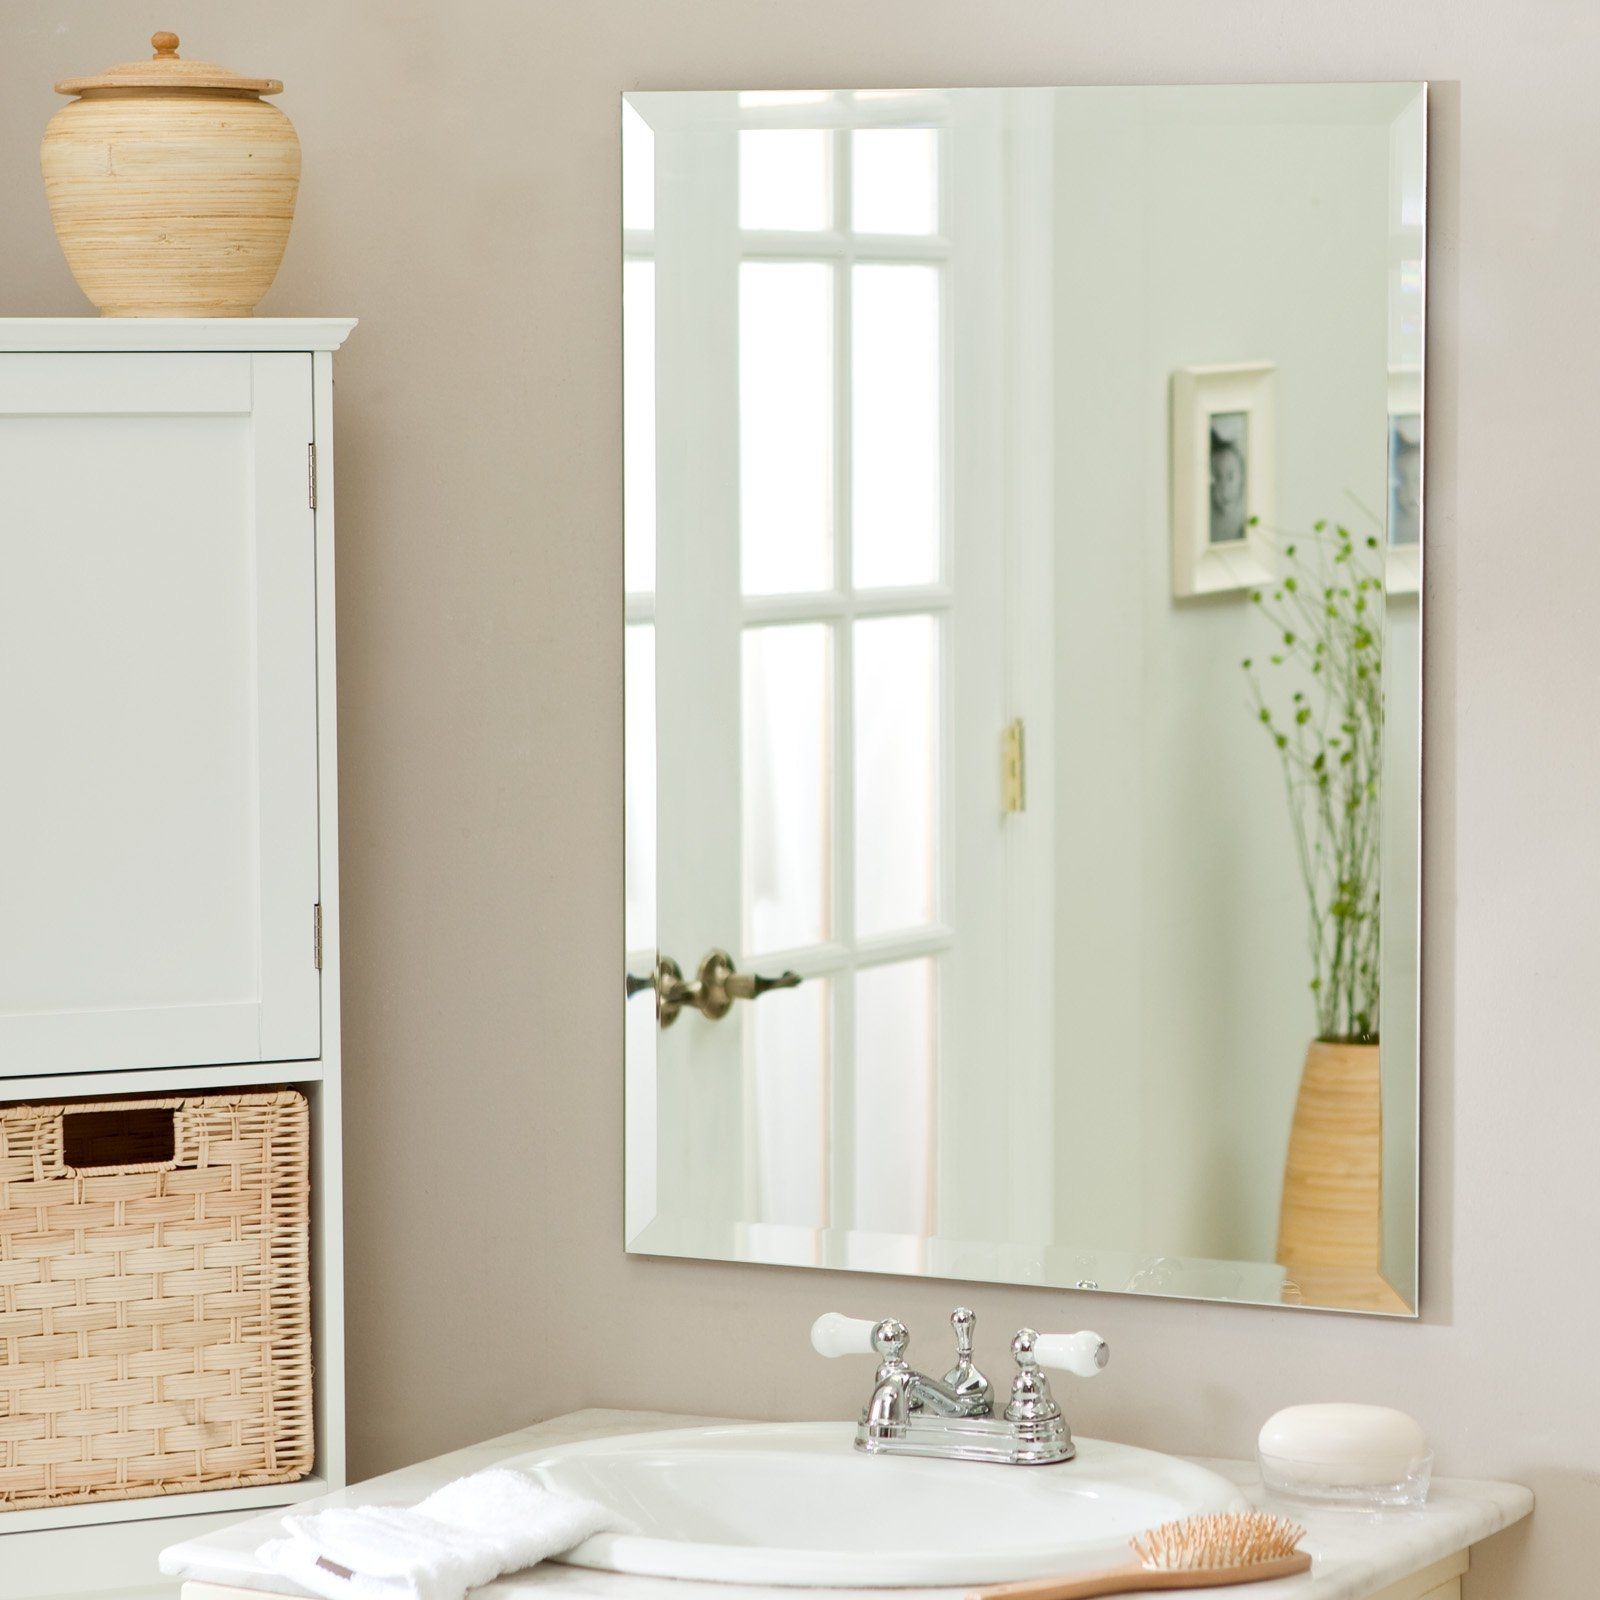 Uttermost Frameless Oval Beveled Vanity Mirror Mirrors At Hayneedle Intended For Large Mirror No Frame (View 7 of 15)